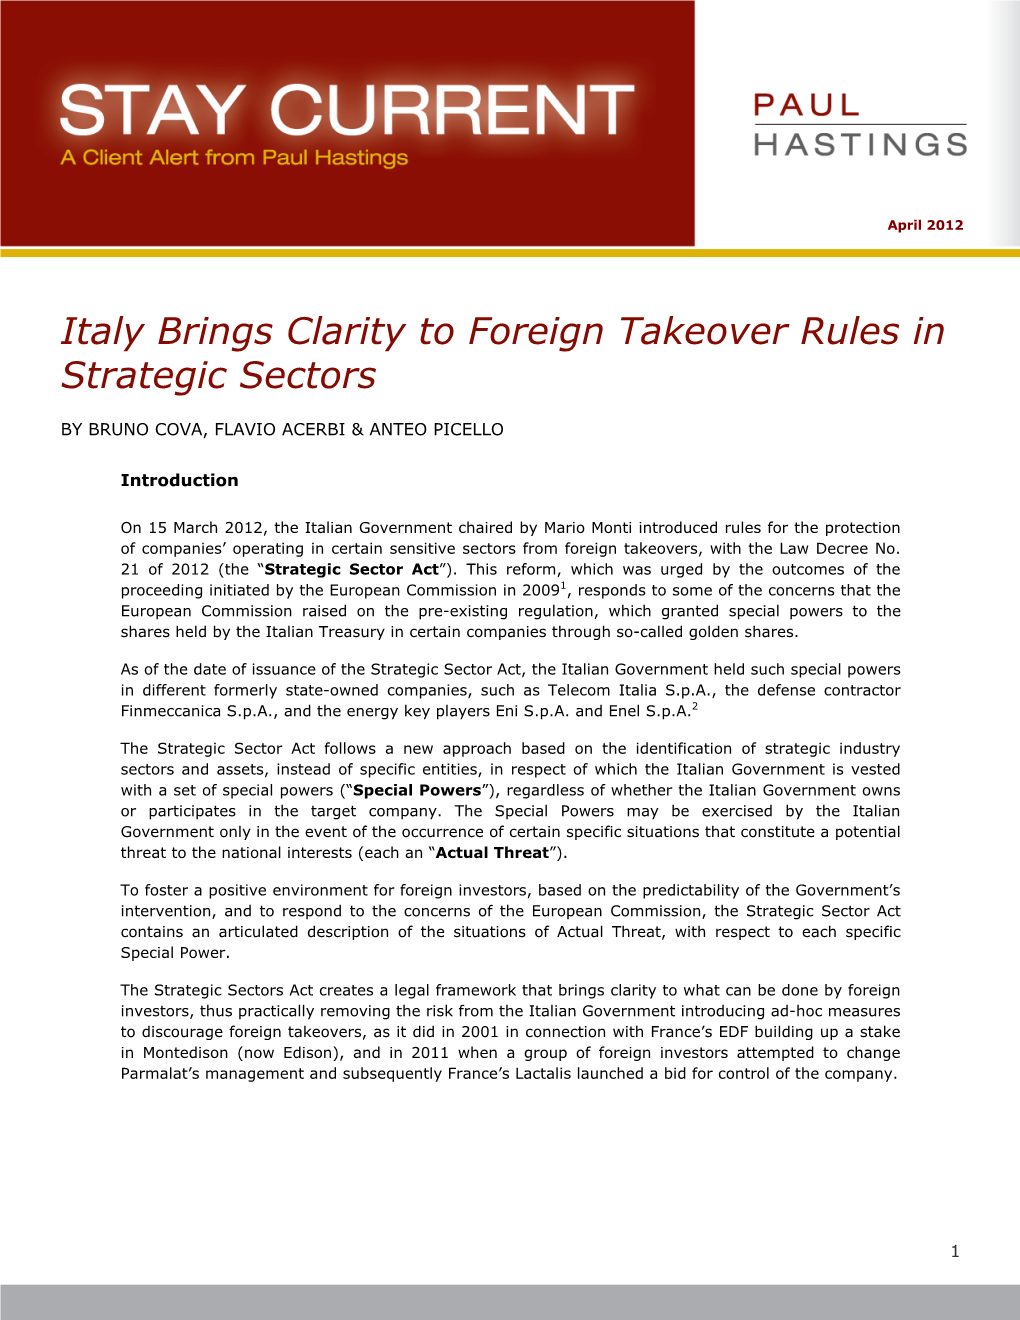 Italy Brings Clarity to Foreign Takeover Rules in Strategic Sectors